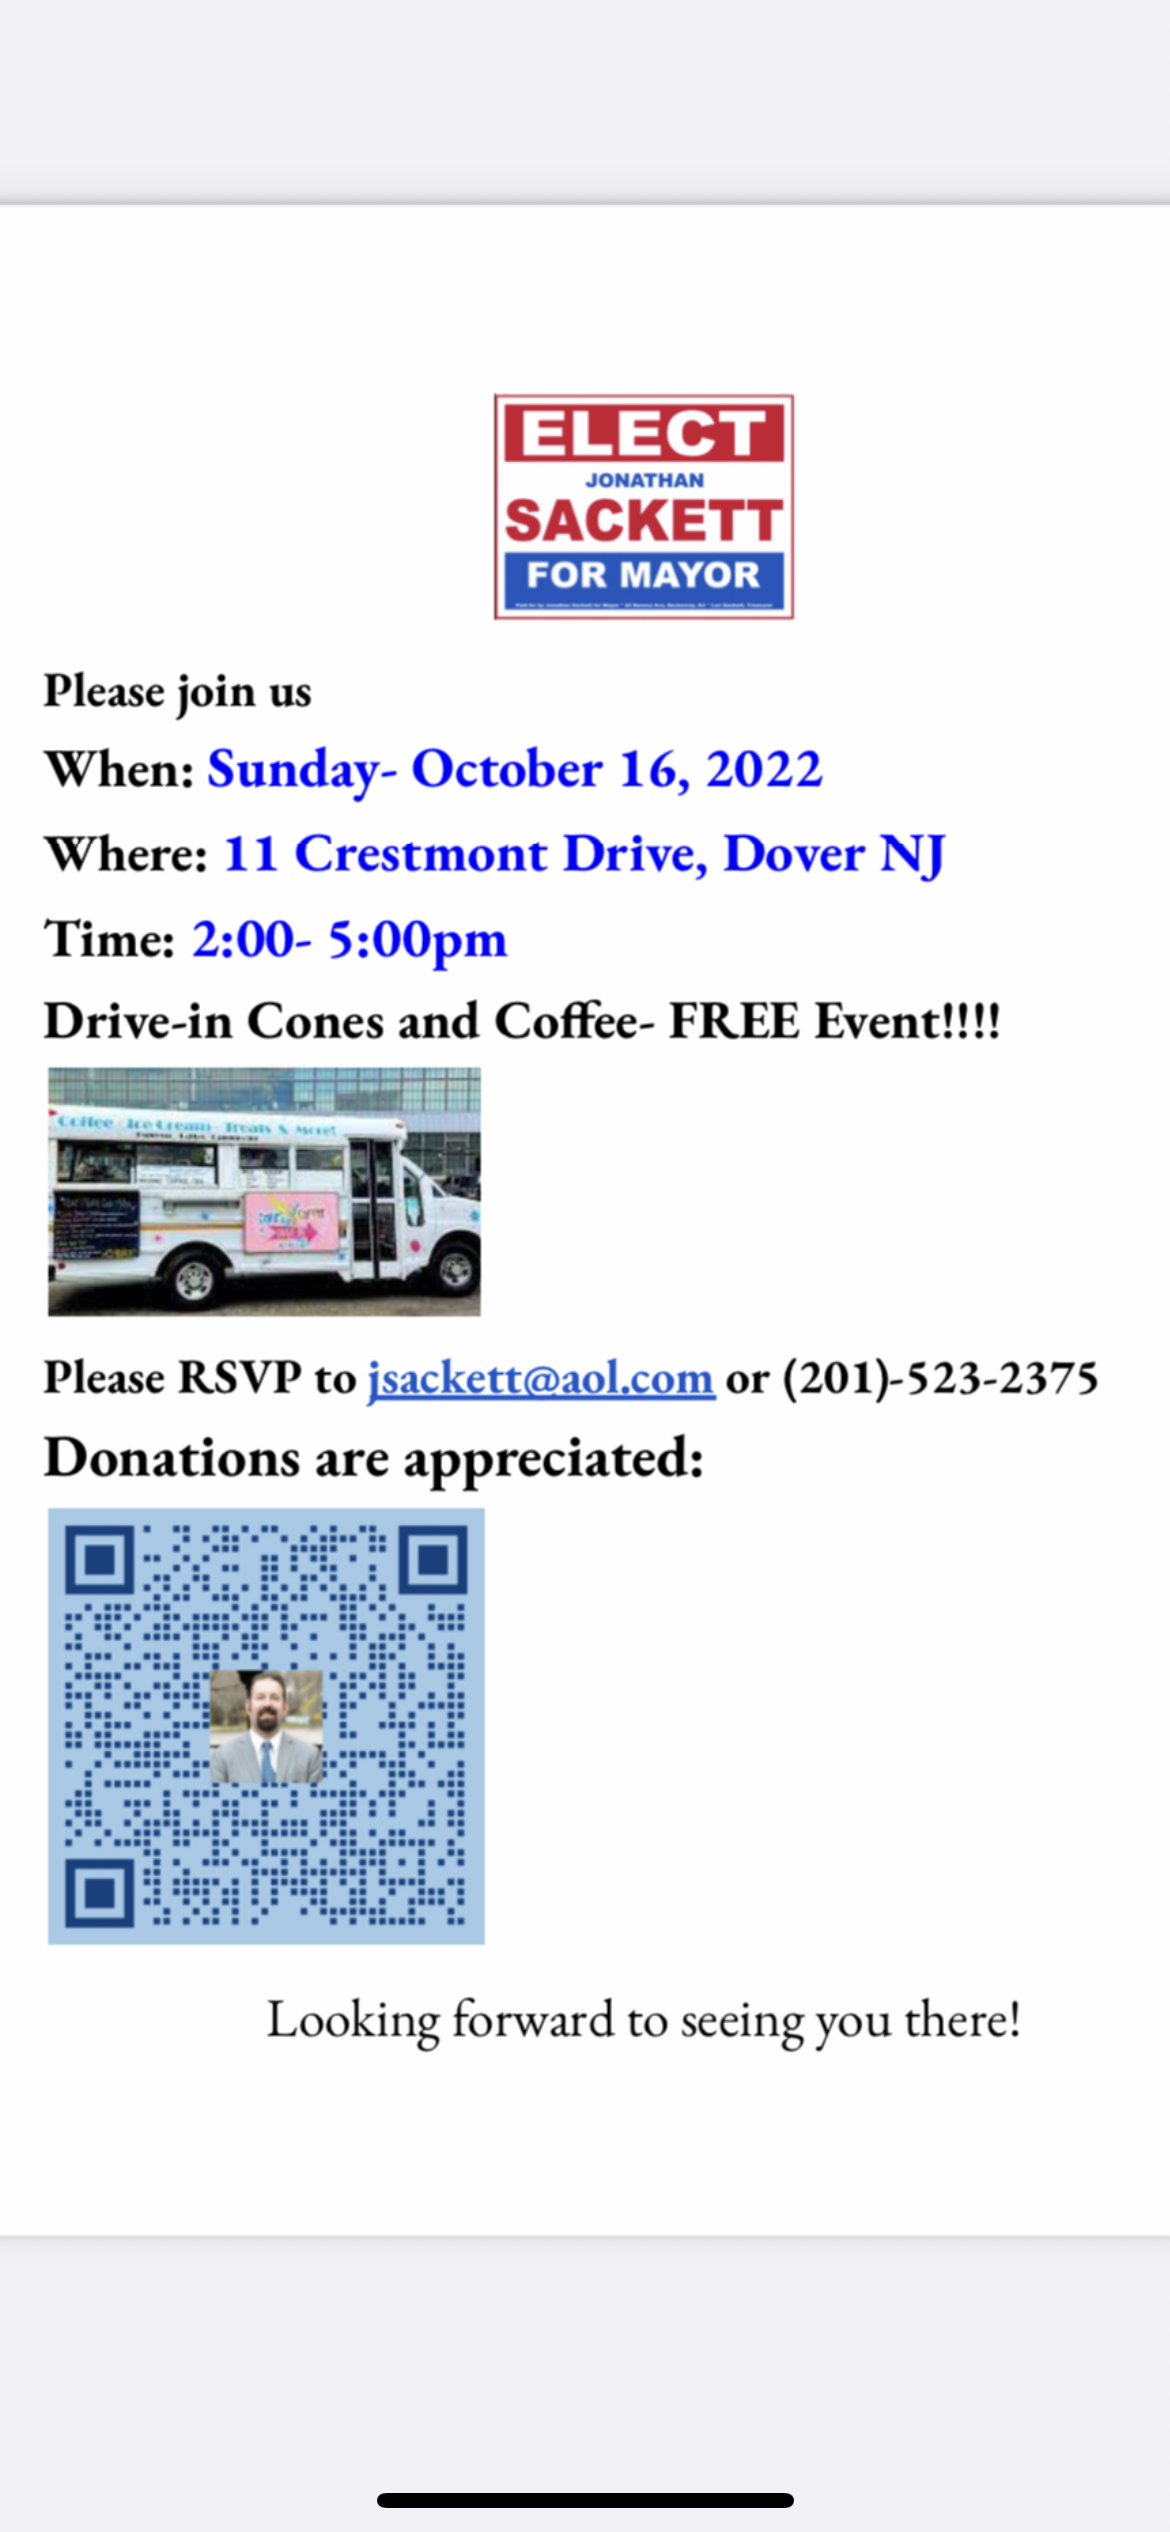 Sackett For Mayor Fundraiser: Drive -in Cones and Coffee - FREE EVENT!